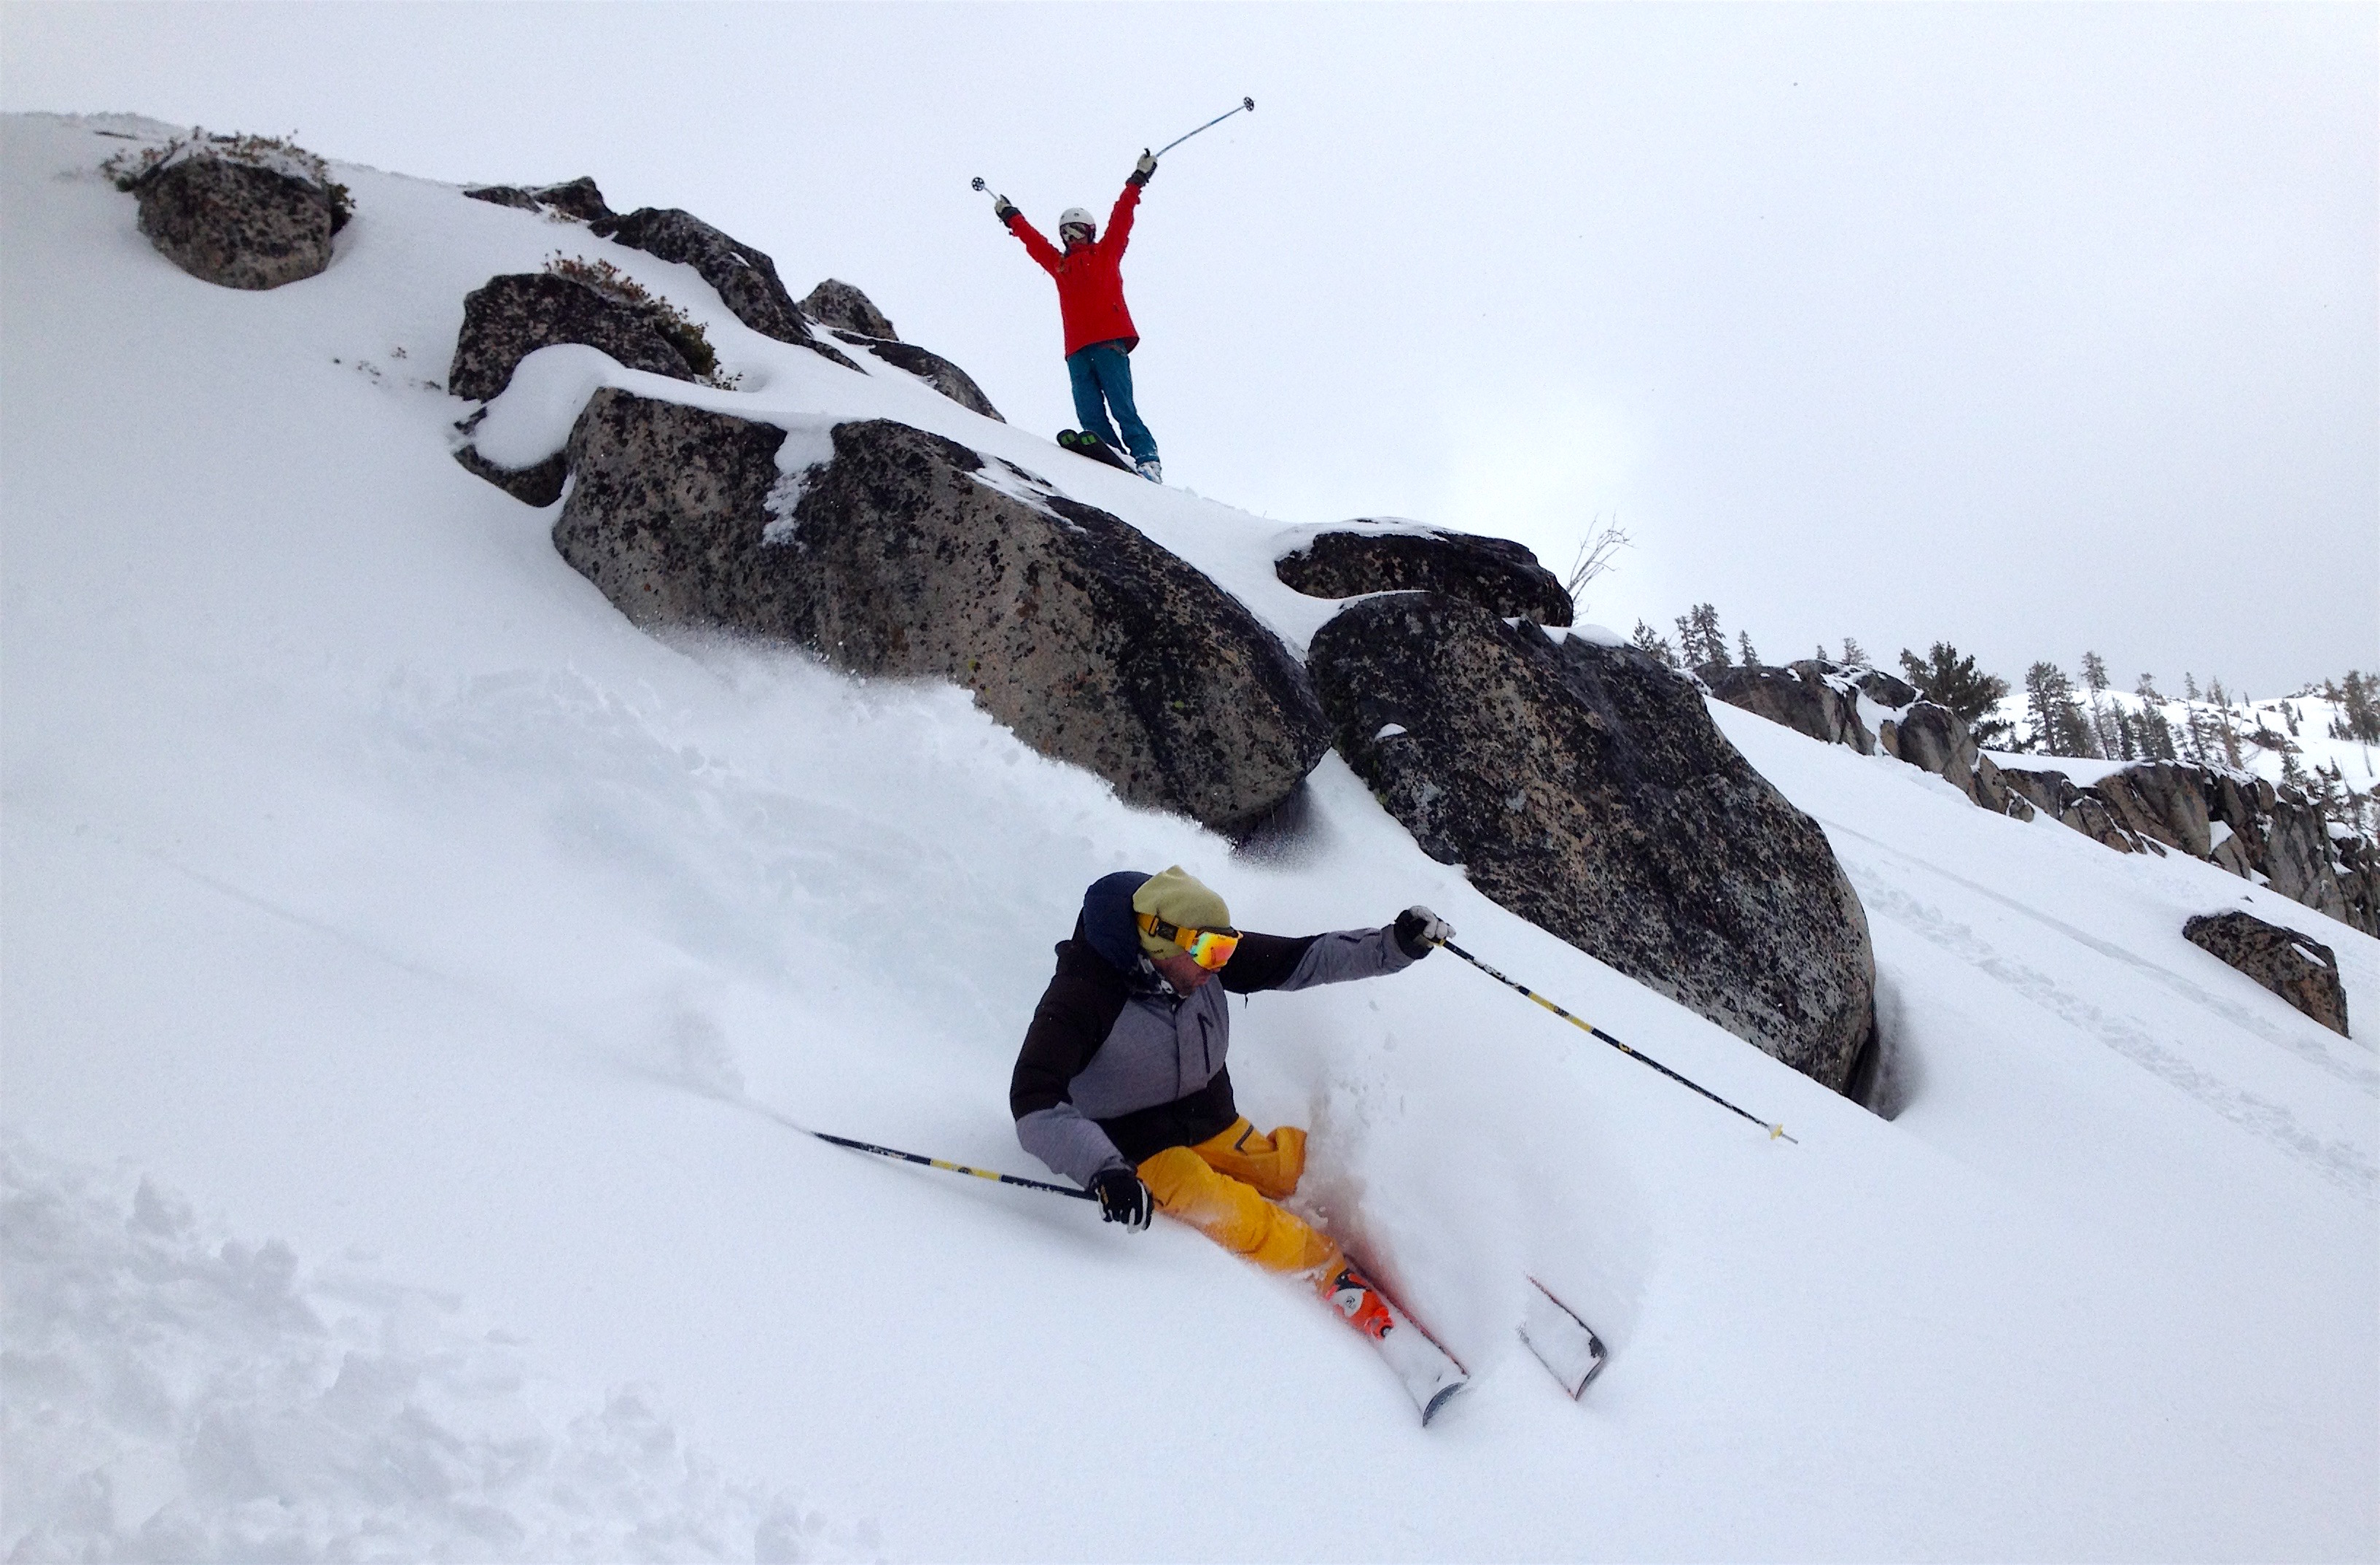 The Andy Hays & Katy crushing Granite on March 23rd. photo: snowbrains.com